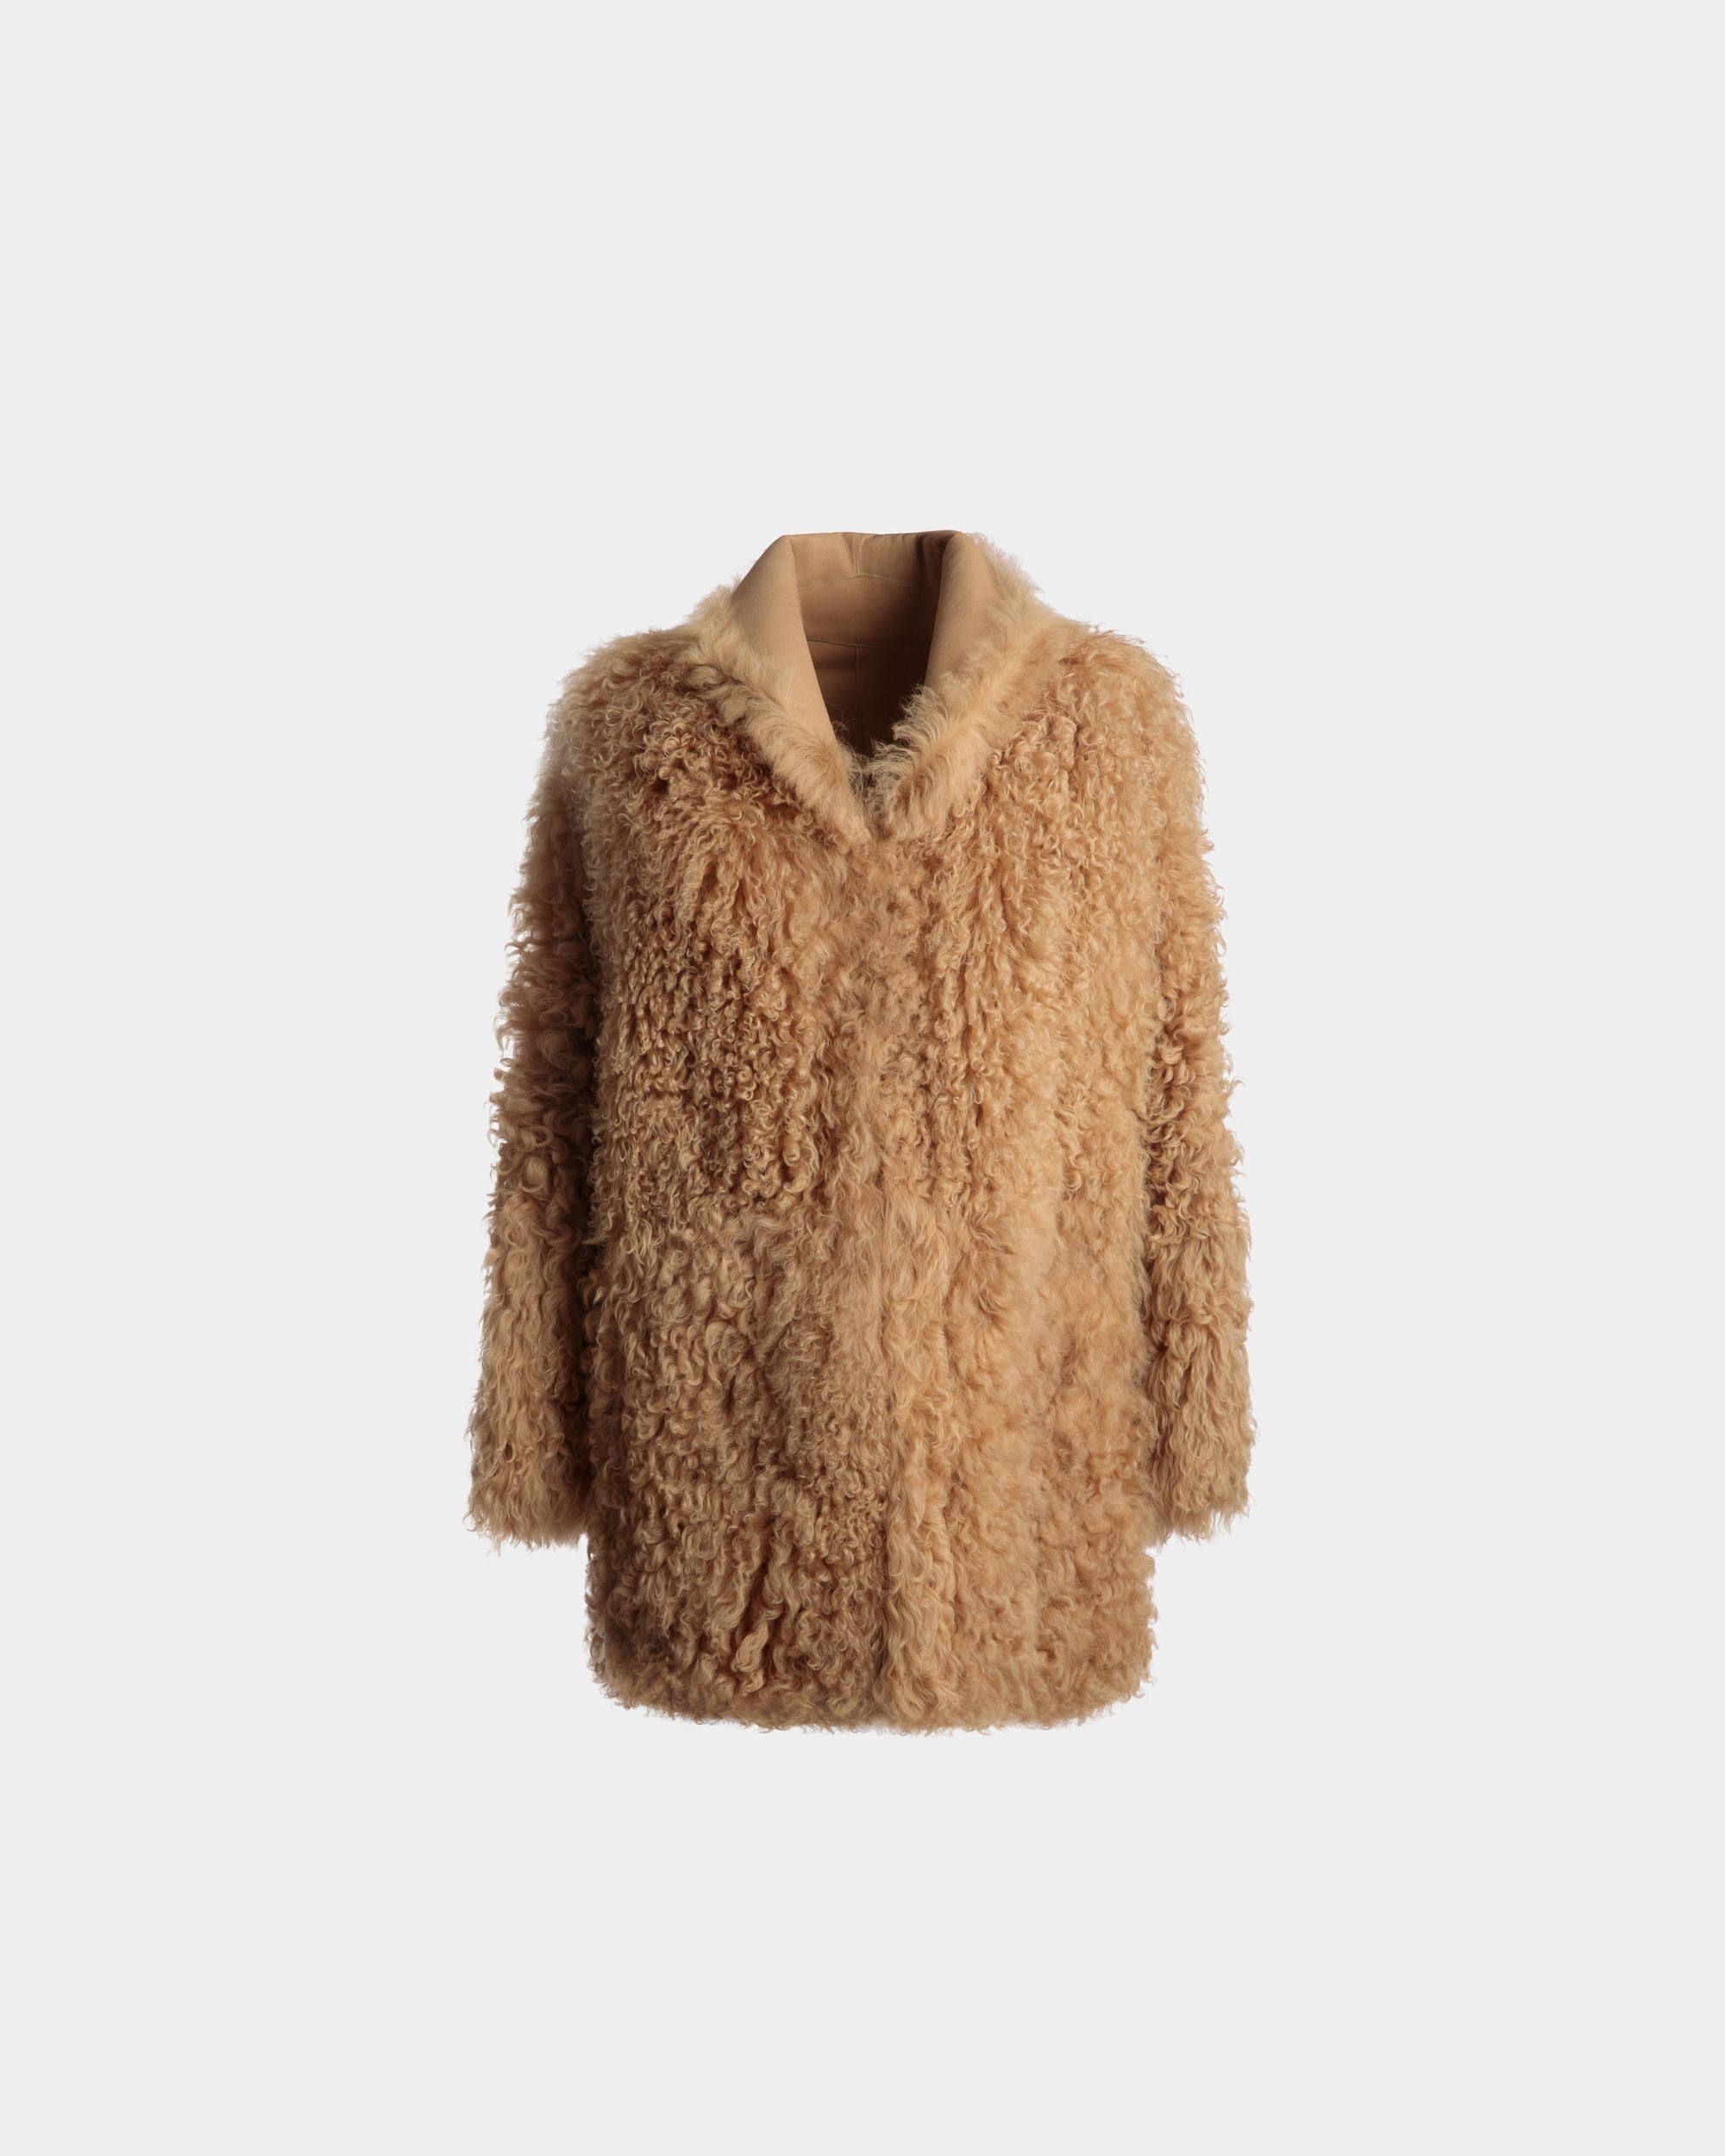 Shaggy Jacket | Women's Outerwear | Brown Shearling | Bally | Still Life Front